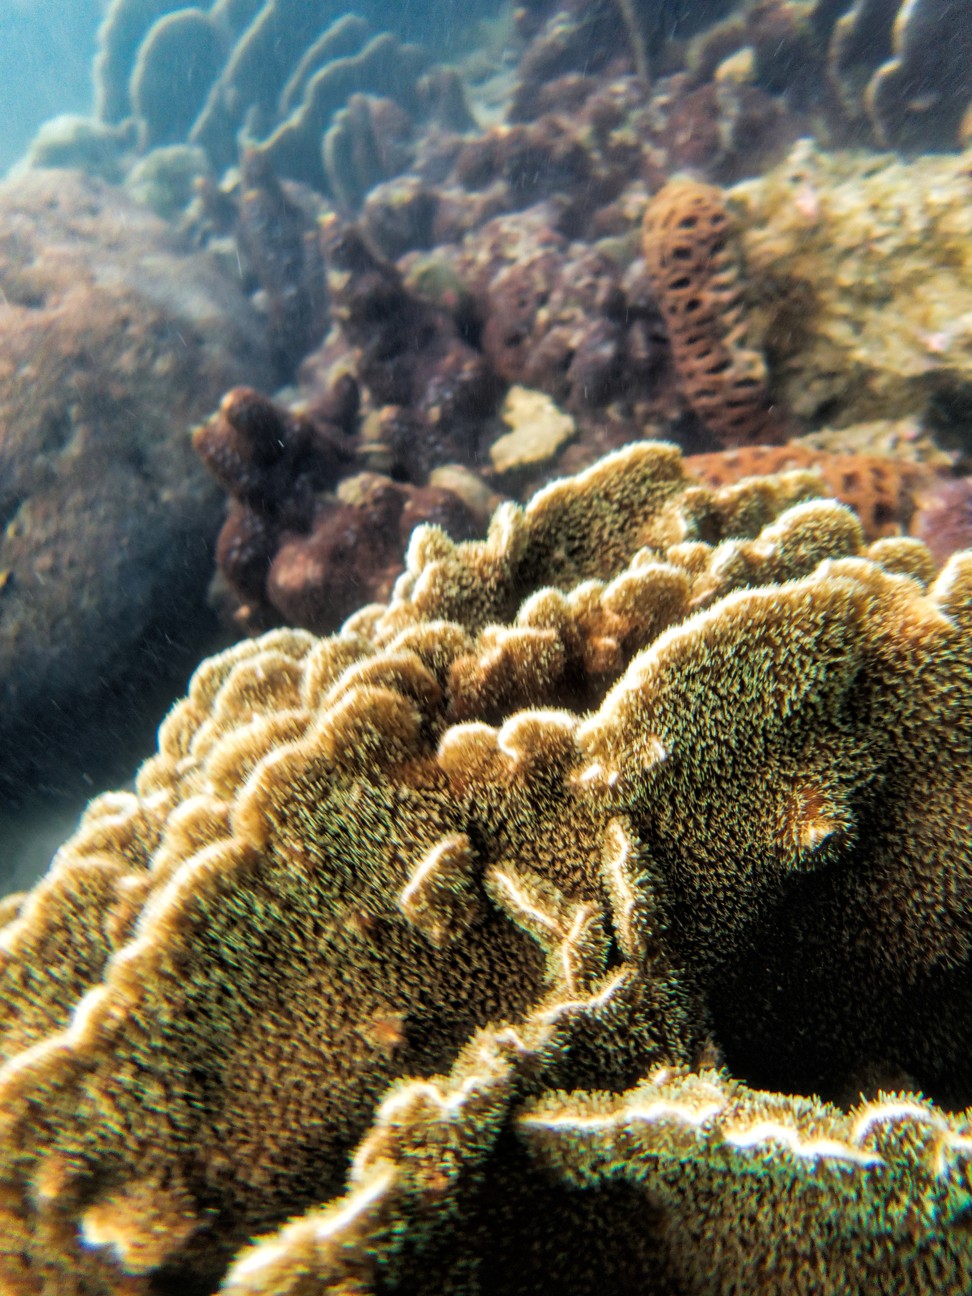 Hoi Ha is known for having areas of coral in its waters. Photo: Martin Williams